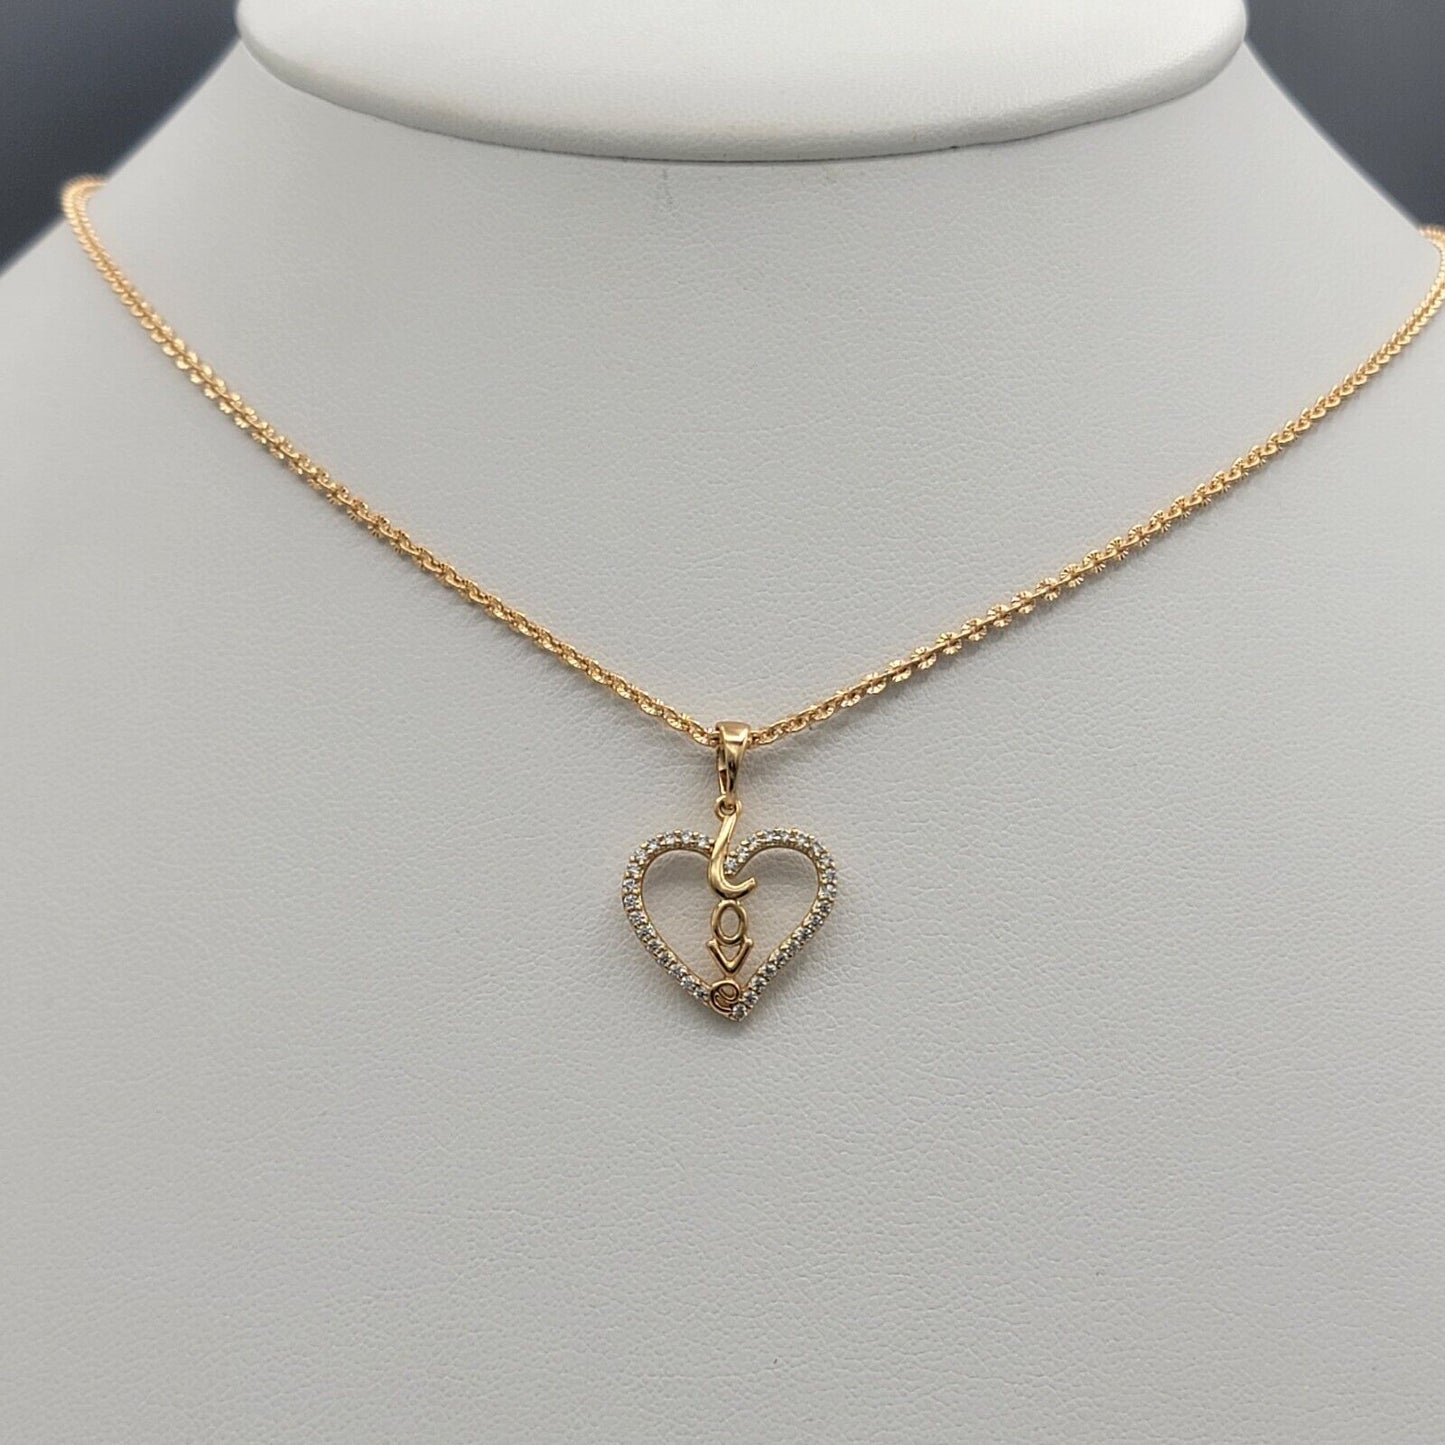 Necklaces - 18K Gold Plated. CZ Heart LOVE Pendant & Chain.